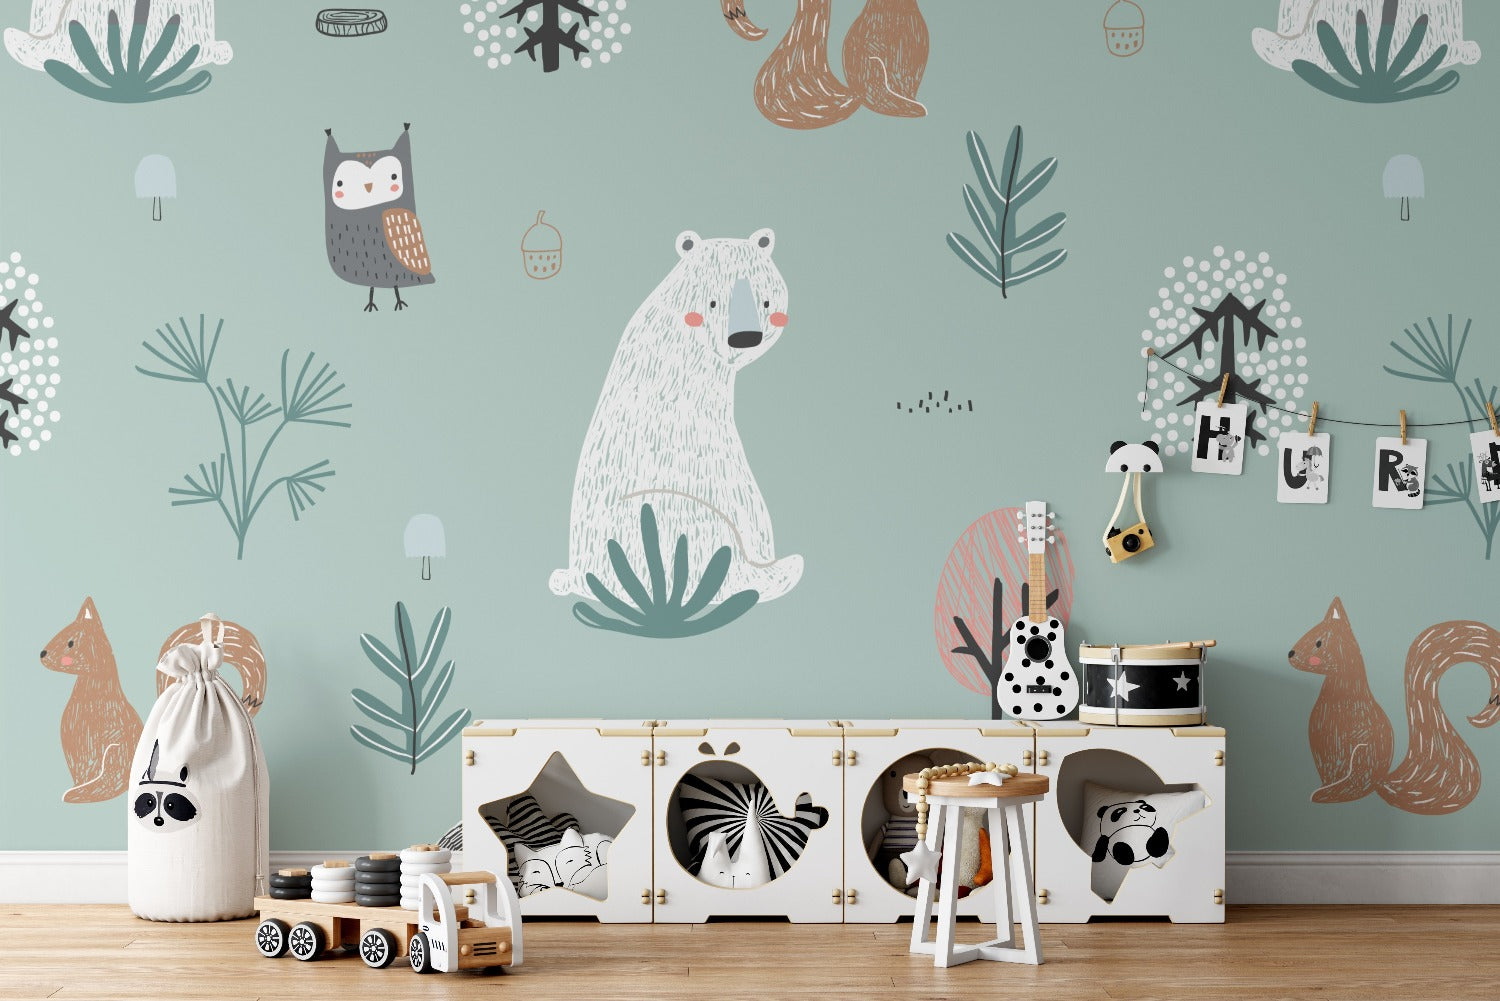 A playful and charming children's room with 'Forest Critters Kids Wallpaper' on the wall, featuring whimsical illustrations of woodland animals and plants in soft colors, above a child's storage unit filled with toys.